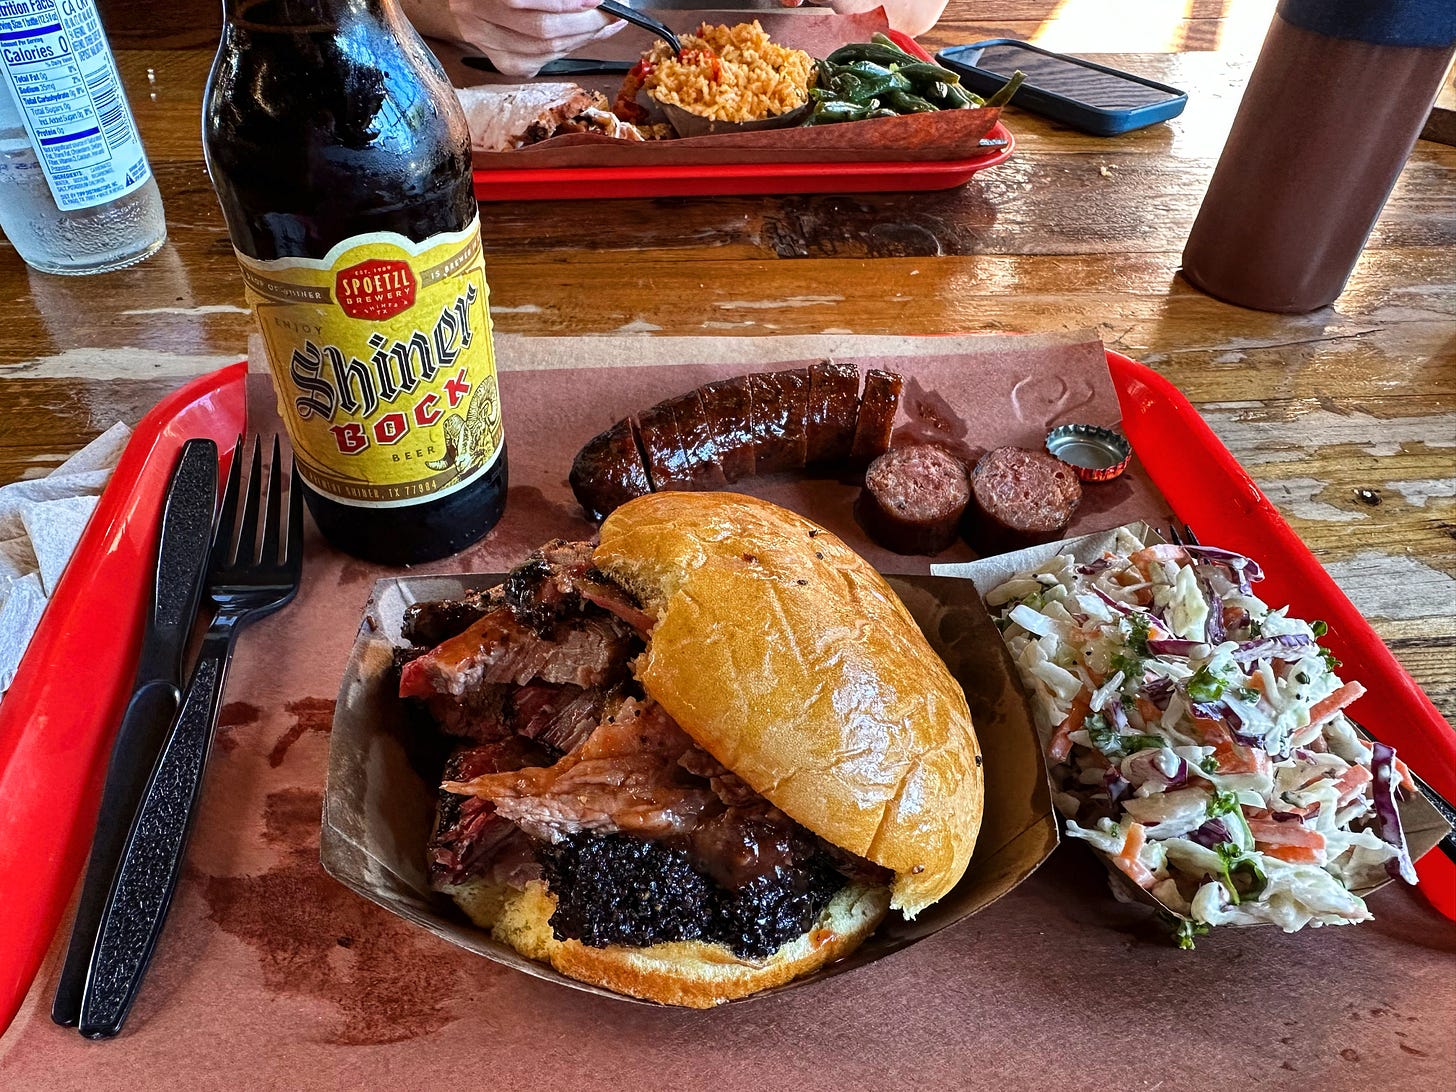 Tray of Texas BBQ with a brisket sandwich, sausage, cole slaw and a Shiner Bock beer